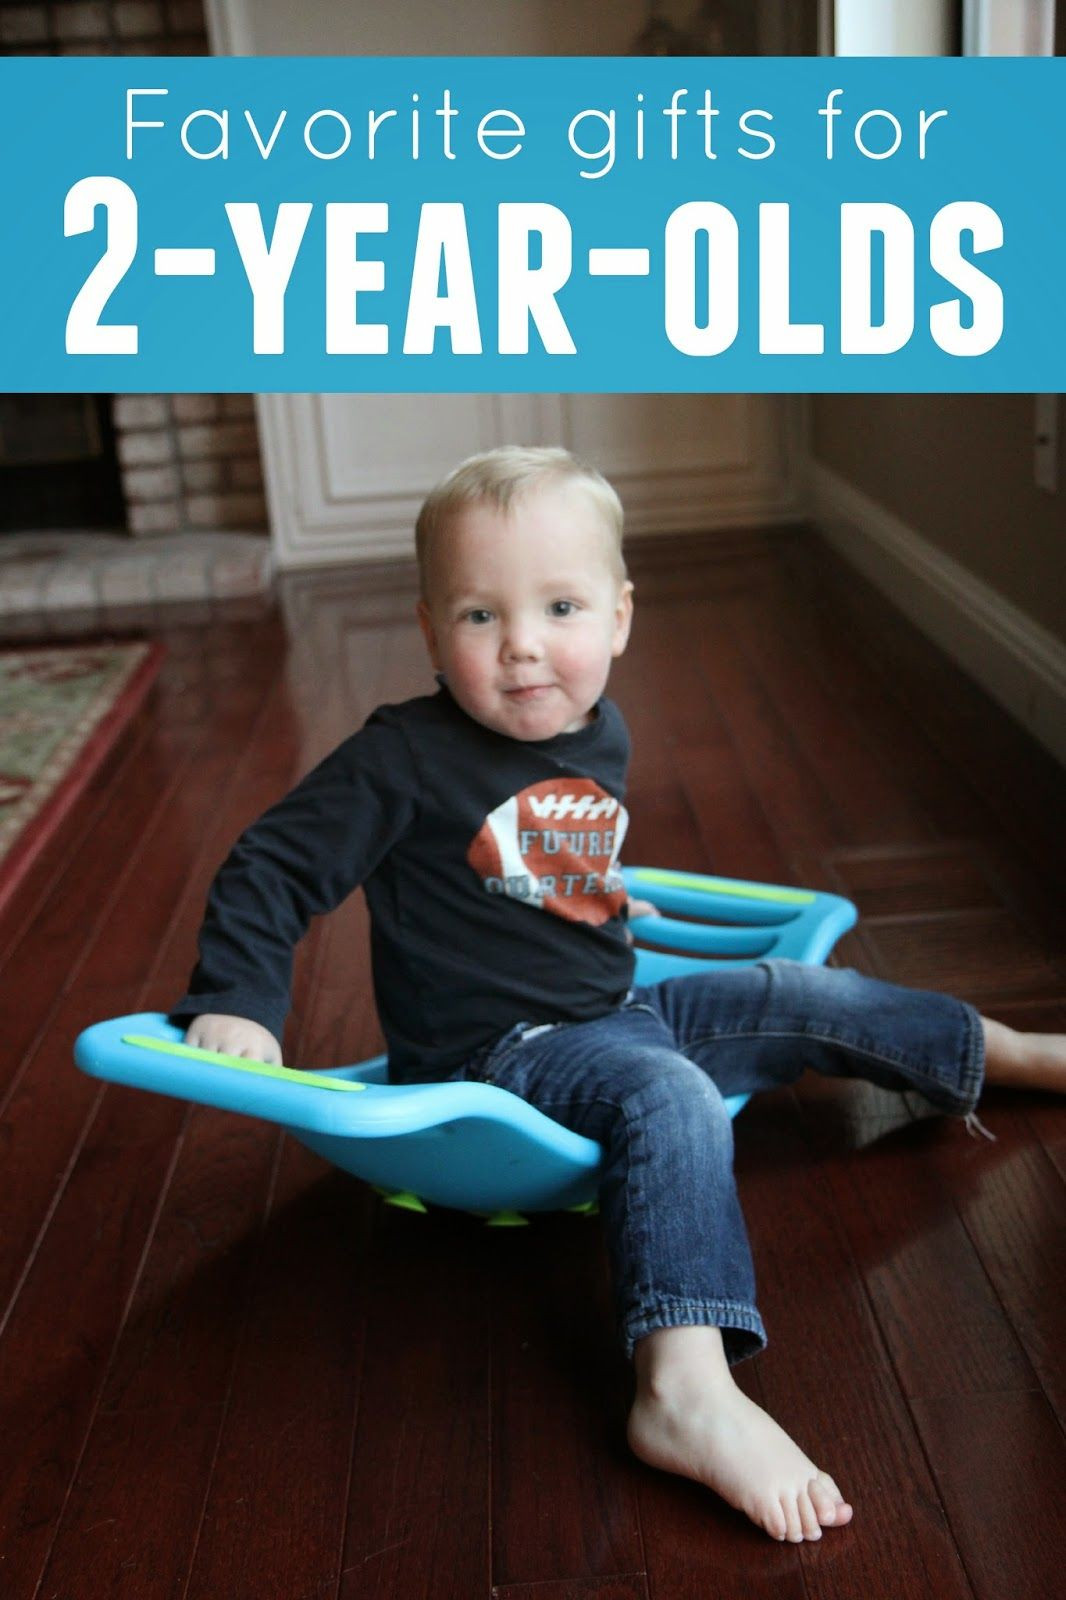 Birthday Gift Ideas For Two Year Old Boy
 Favorite Gifts for 2 Year Olds